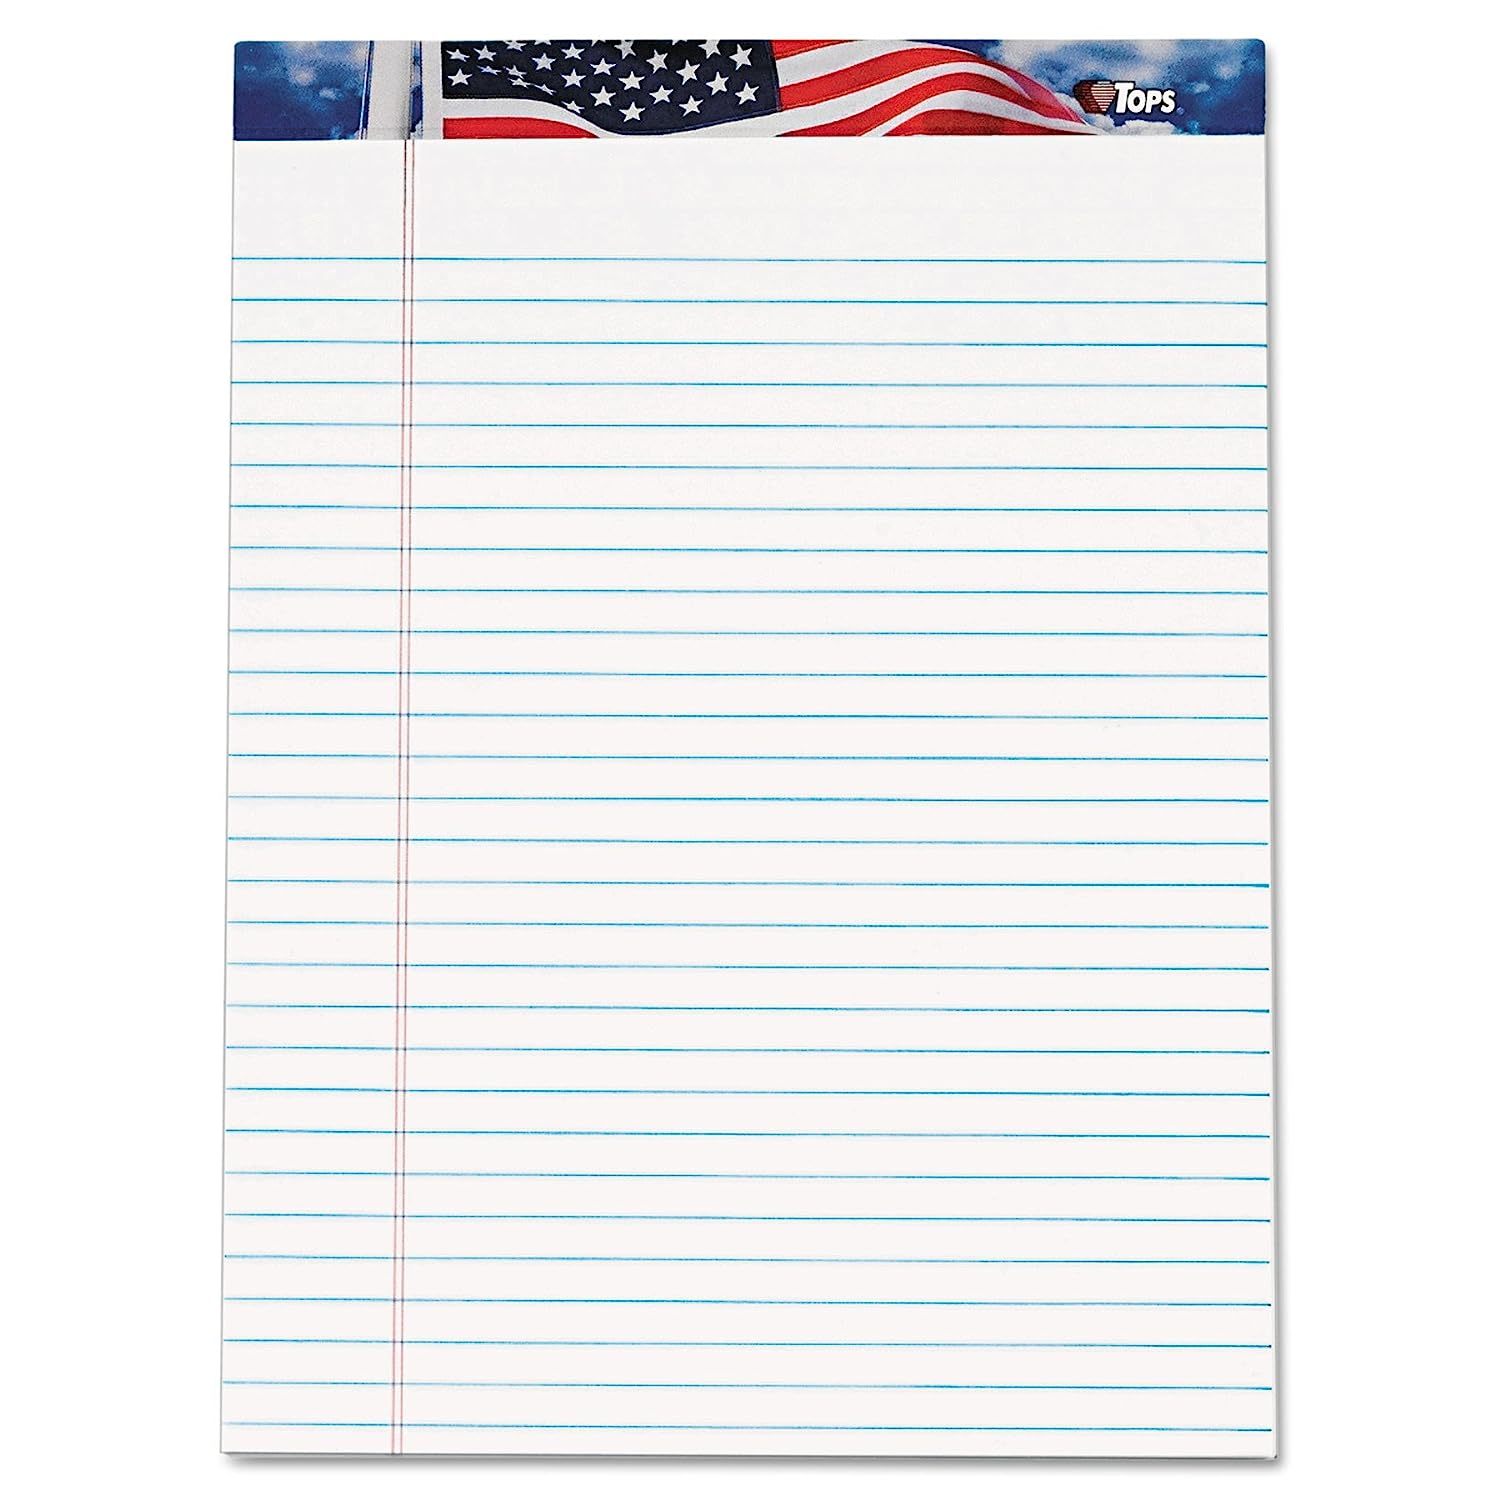 TOPS 75111 American Pride Writing Pad, Legal/Wide, 8 1/2 x 11 3/4, White, 50 She - $48.99